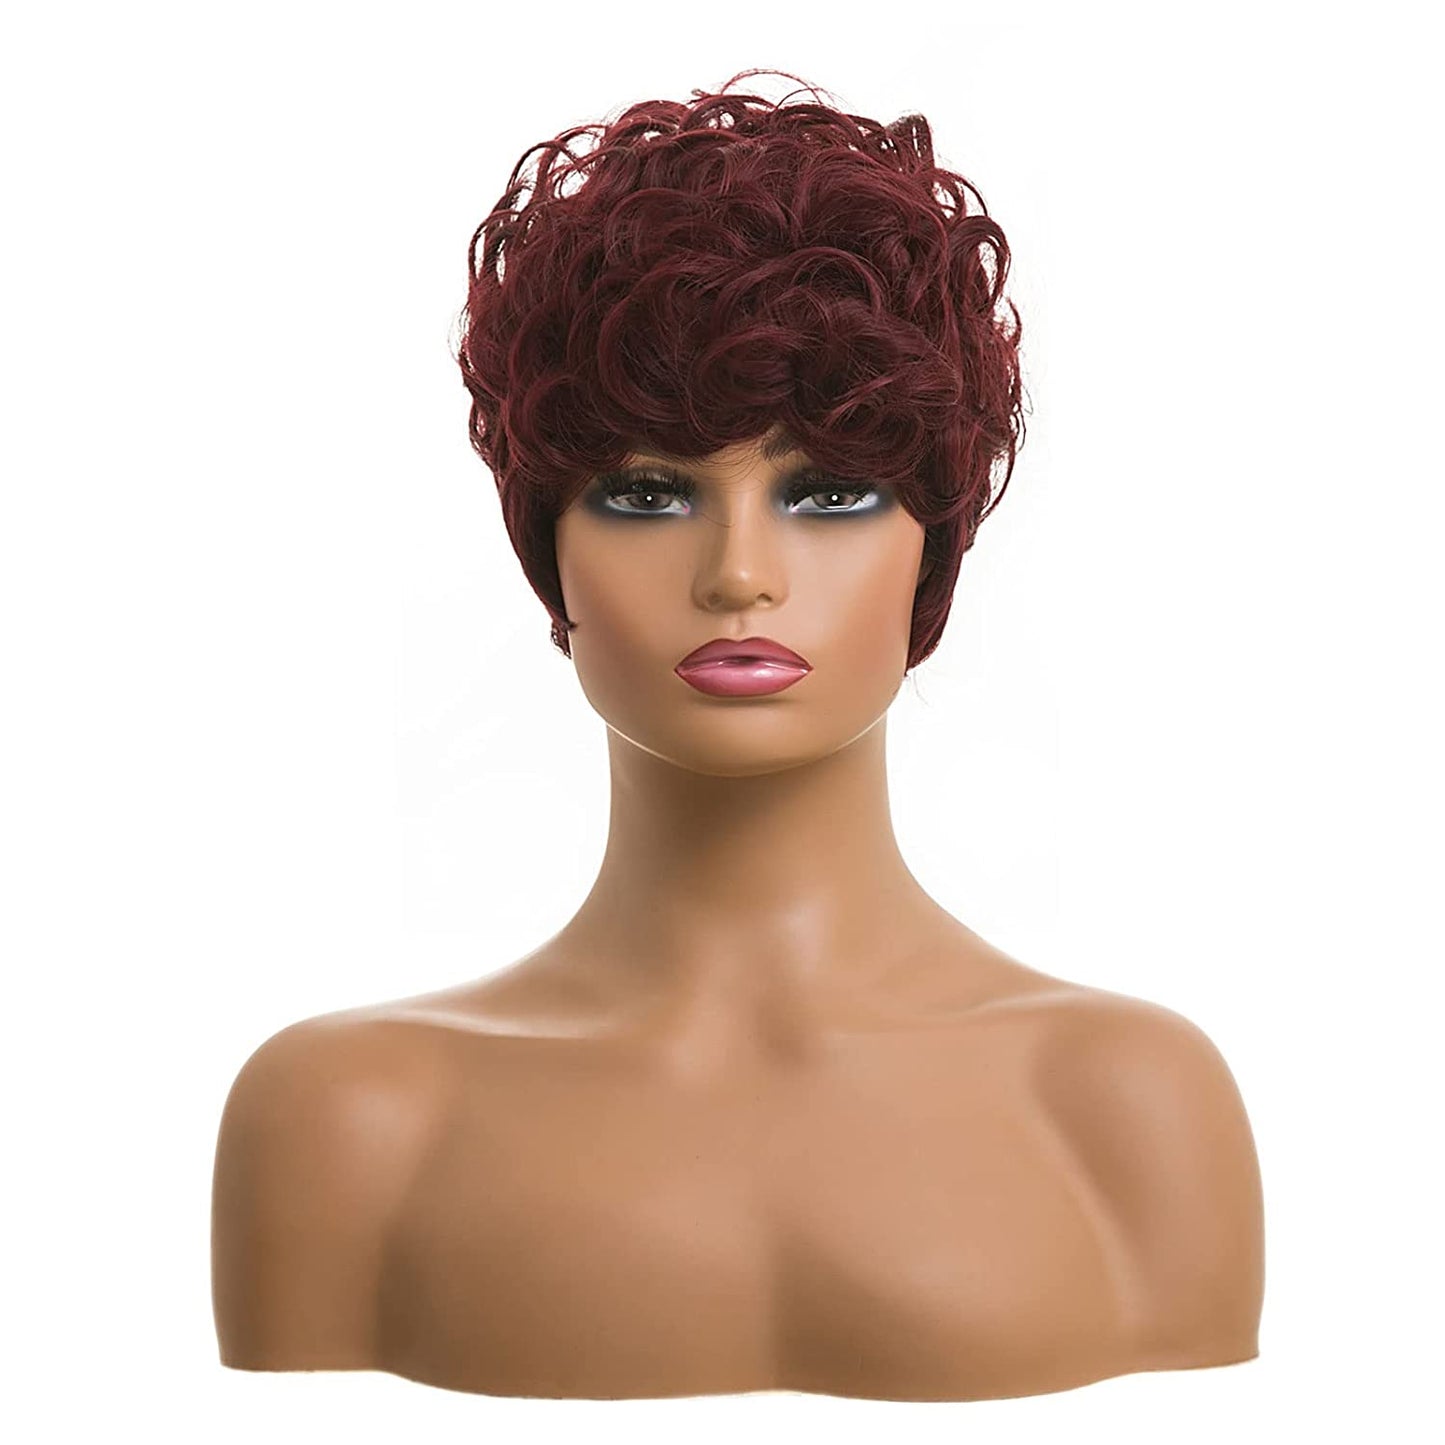 Shop Short Pixie Color Burgundy 99J hair color Wig Hair Replacement Short Pixie Cut Wig for Black Women Pixie Cut Wig with  Bangs Short Curly Wigs for Black Women Natural Wavy Layered Pixie Wig for African... Color : different hair replacement system products including men’s toupees, women’s wigs, toppers and hair extensions, wholesalers, including online shop owners, salon owners, hair stylists regional wig and hair system distributors. feelmorelikeuhair.com